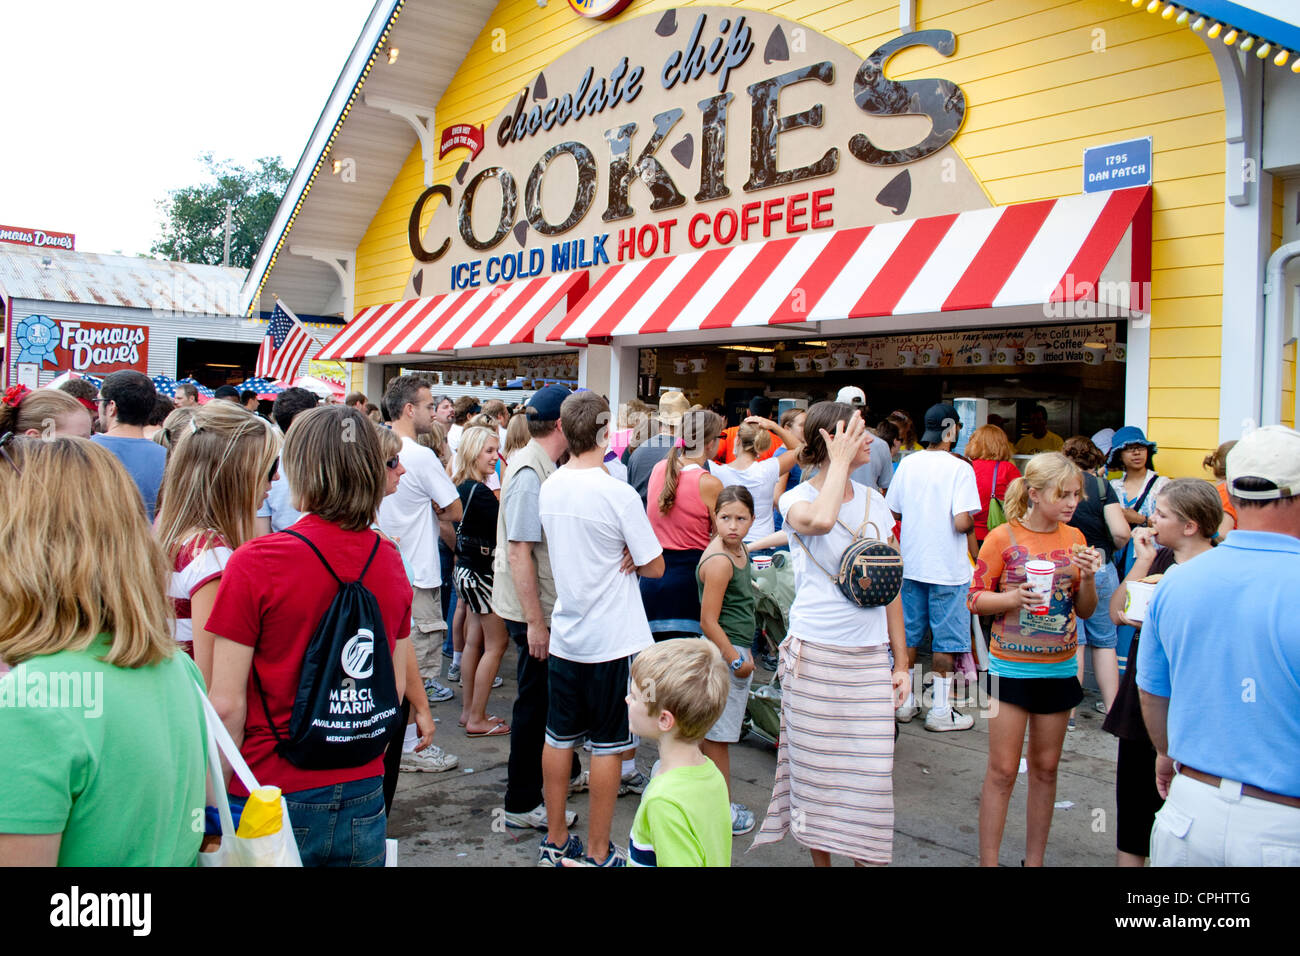 Long lines waiting at the chocolate chip cookies shop along with milk and coffee. Minnesota State Fair St Paul Minnesota MN USA Stock Photo